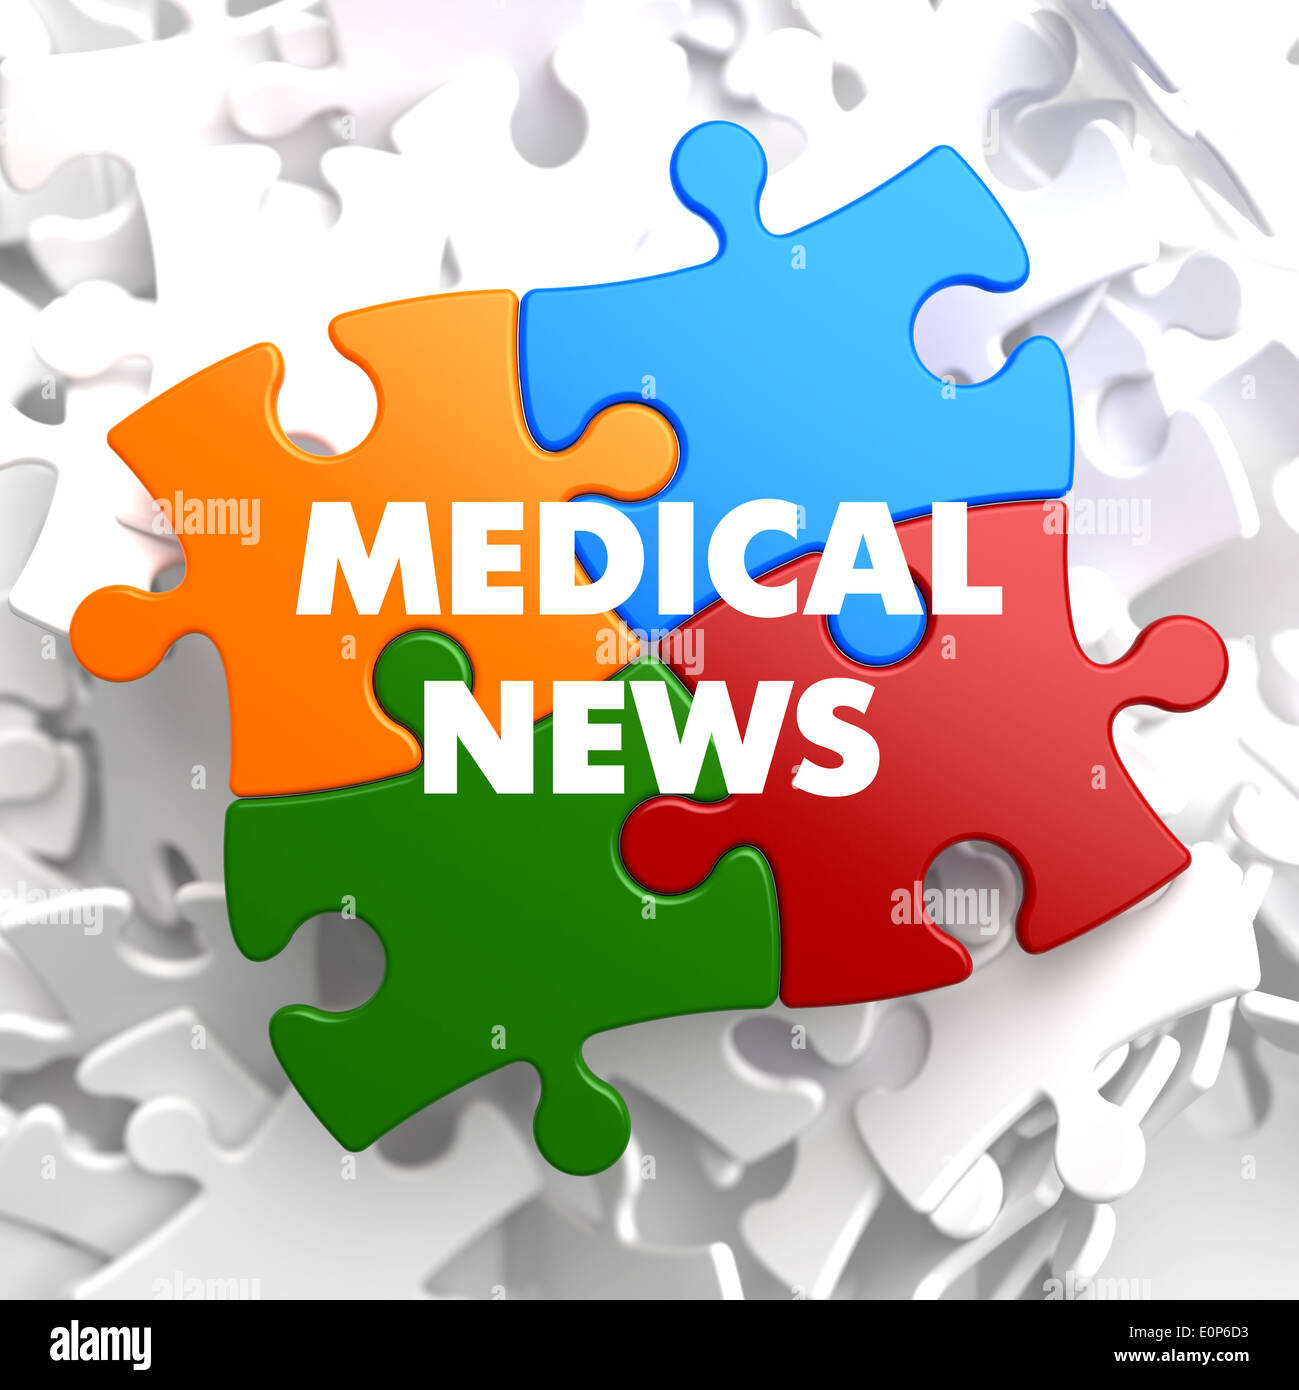 Medical News on Multicolor Puzzle. Stock Photo